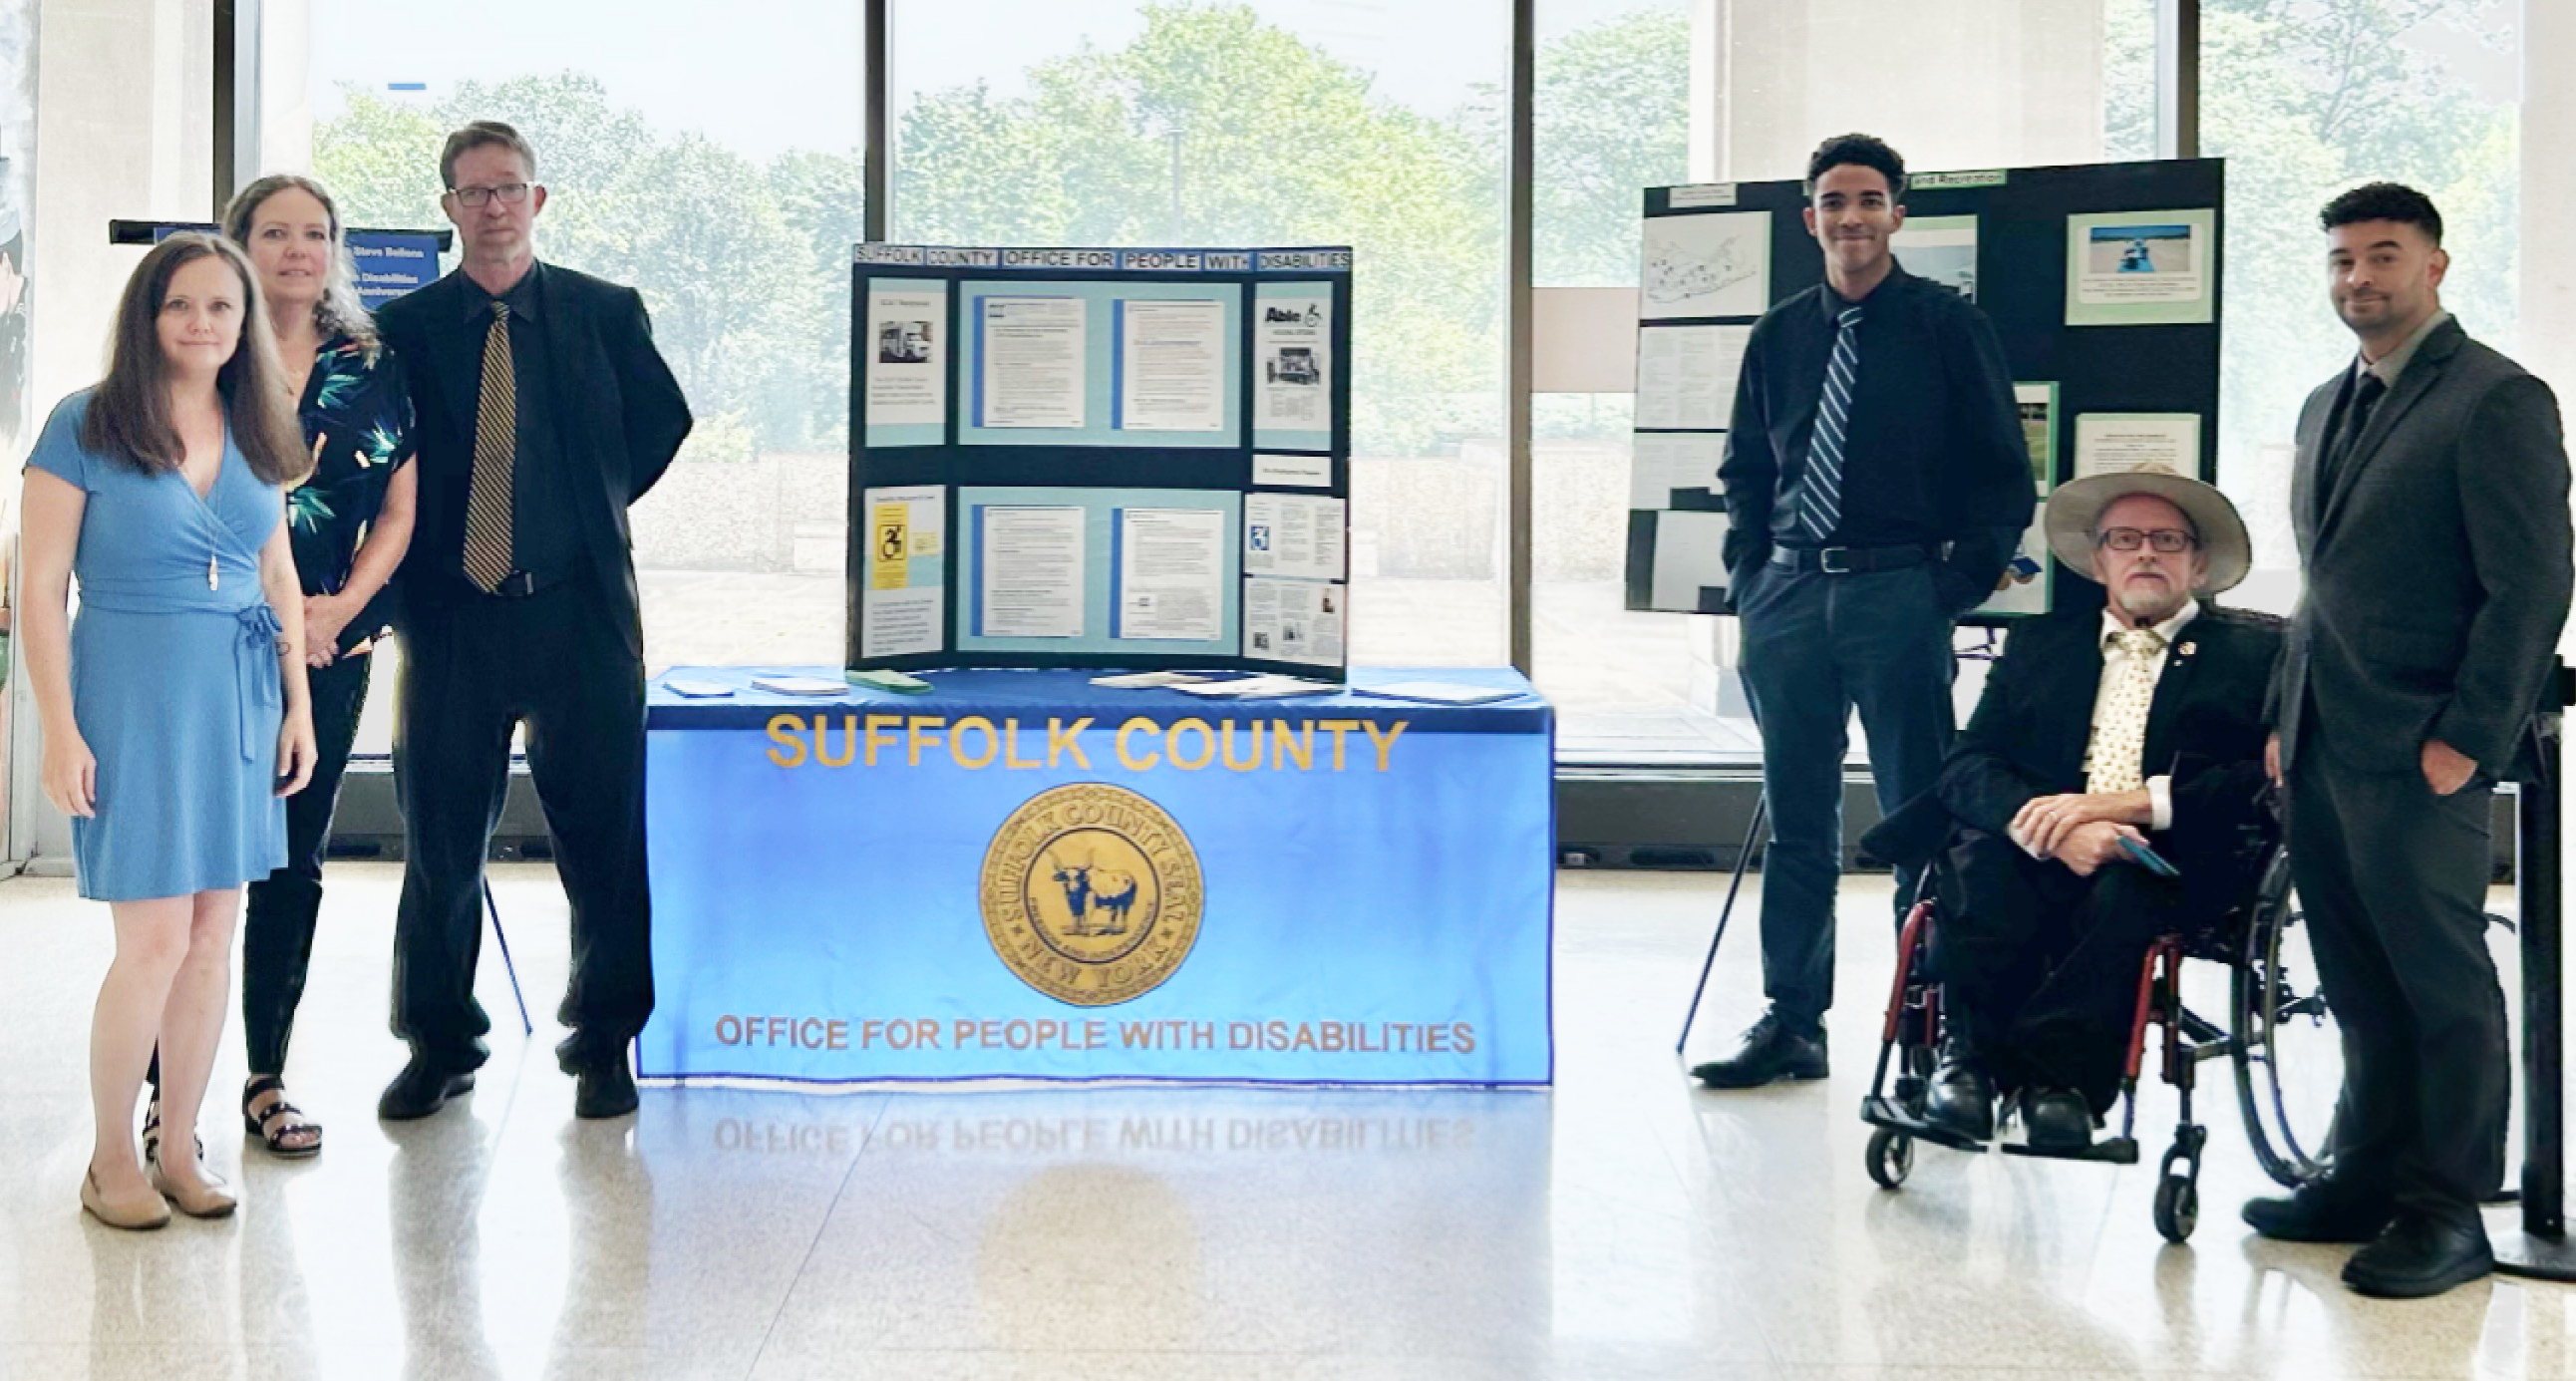 photo op of the Suffolk County Office for People with Disabilities